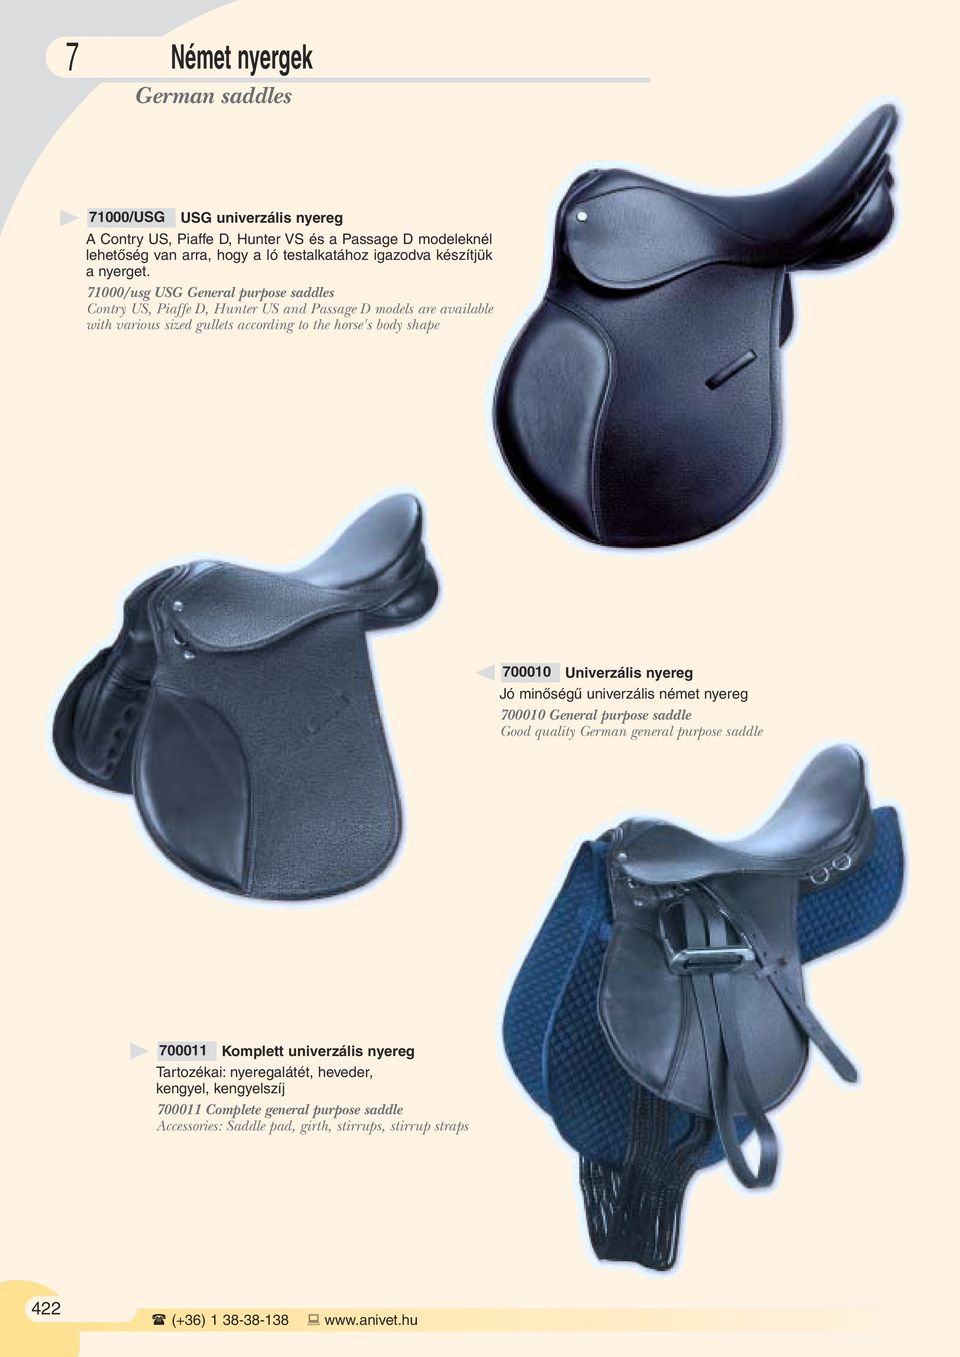 71000/usg USG General purpose saddles Contry US, Piaffe D, Hunter US and Passage D models are available with various sized gullets according to the horse's body shape